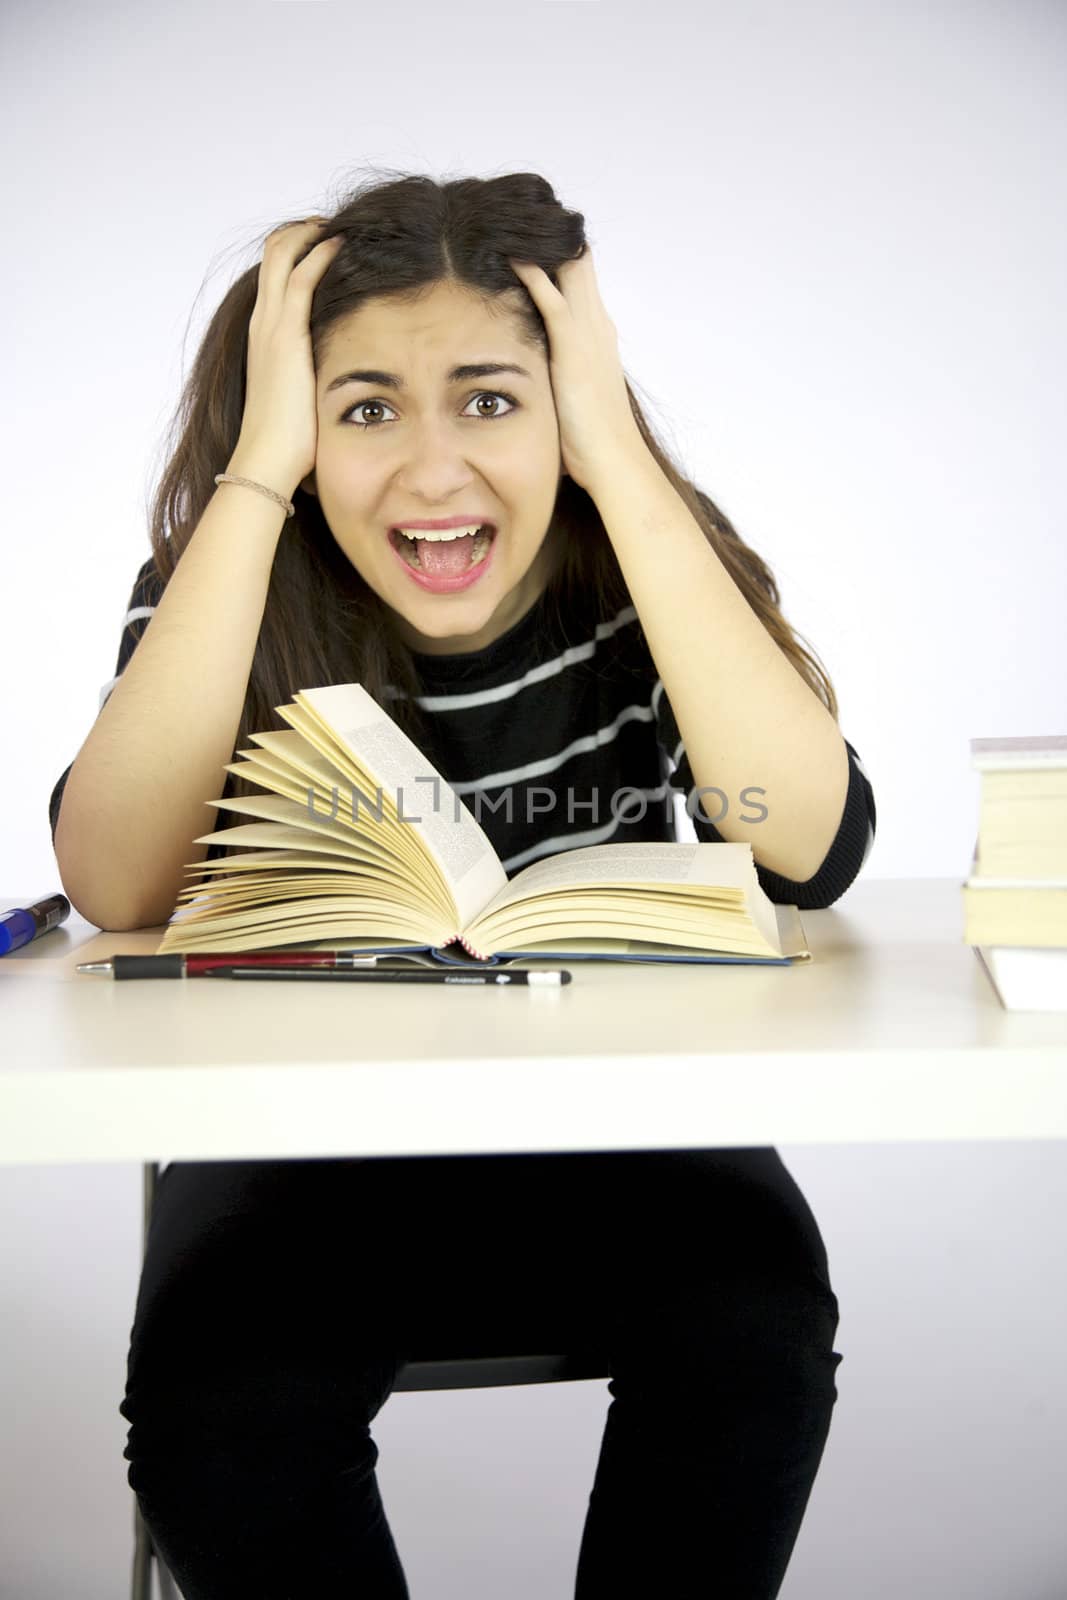 Girl studying book shouts desperate by fmarsicano